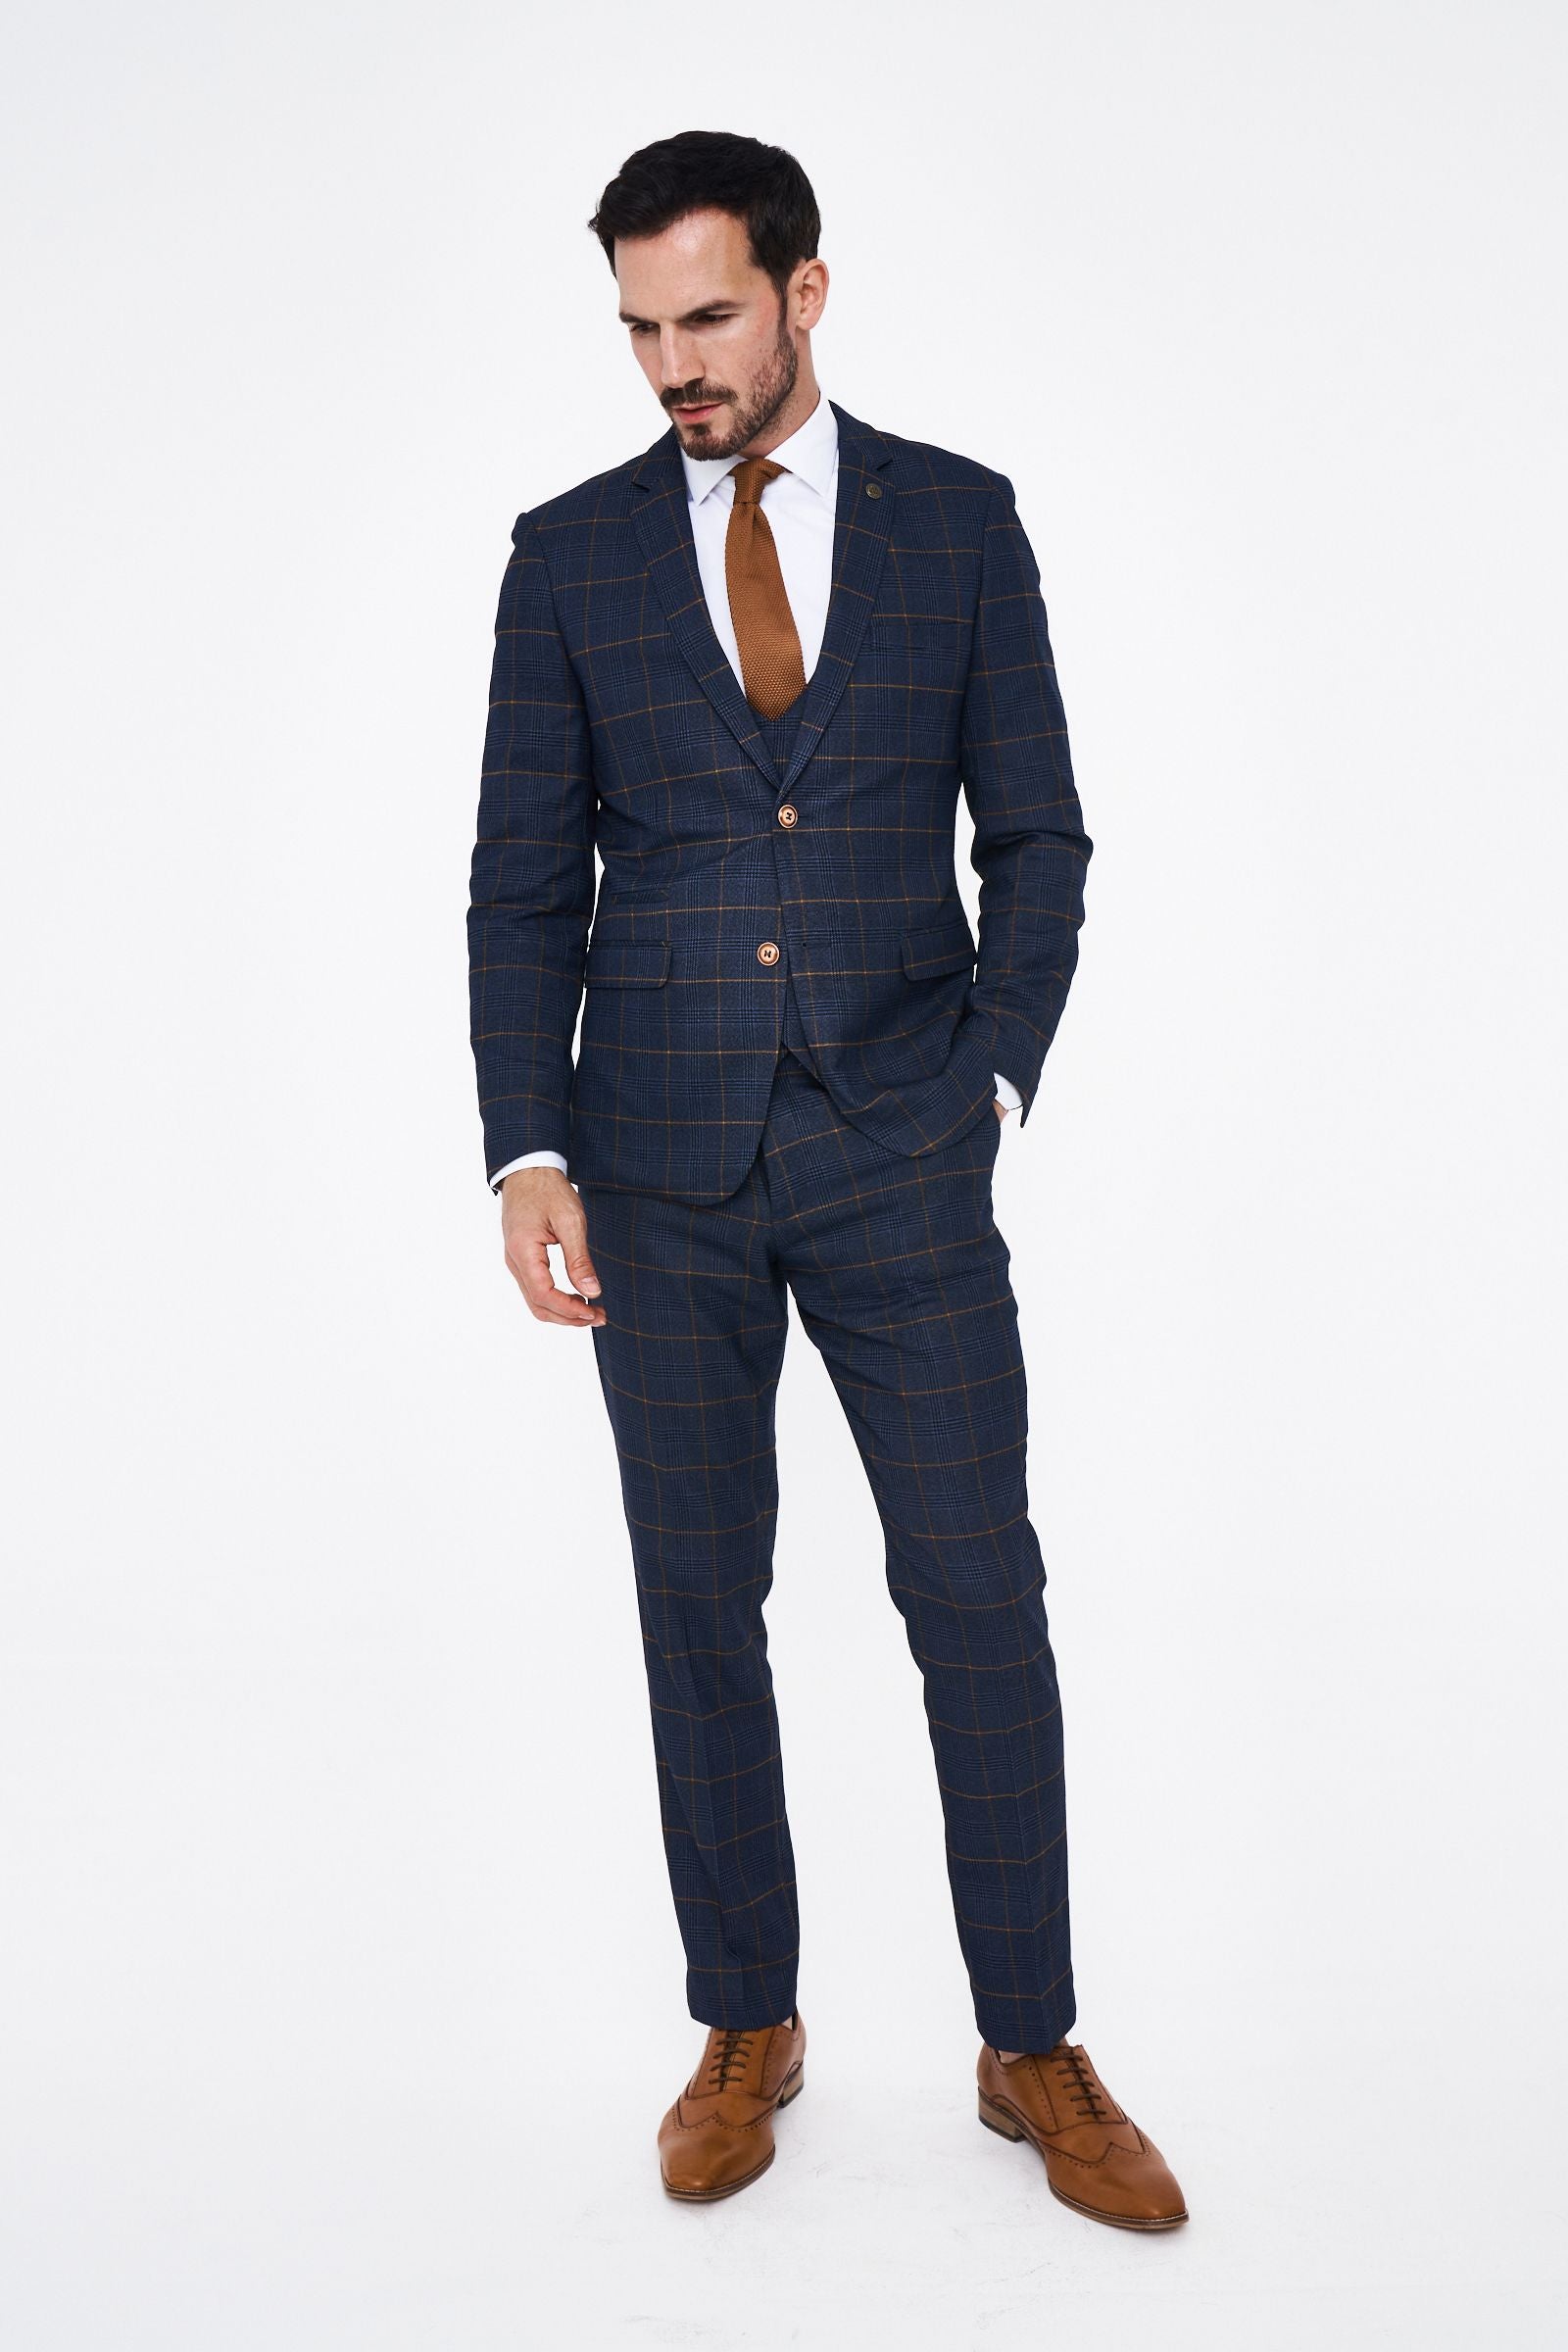 Jenson - Sky Blue Check Suit With Double Breasted Waistcoat